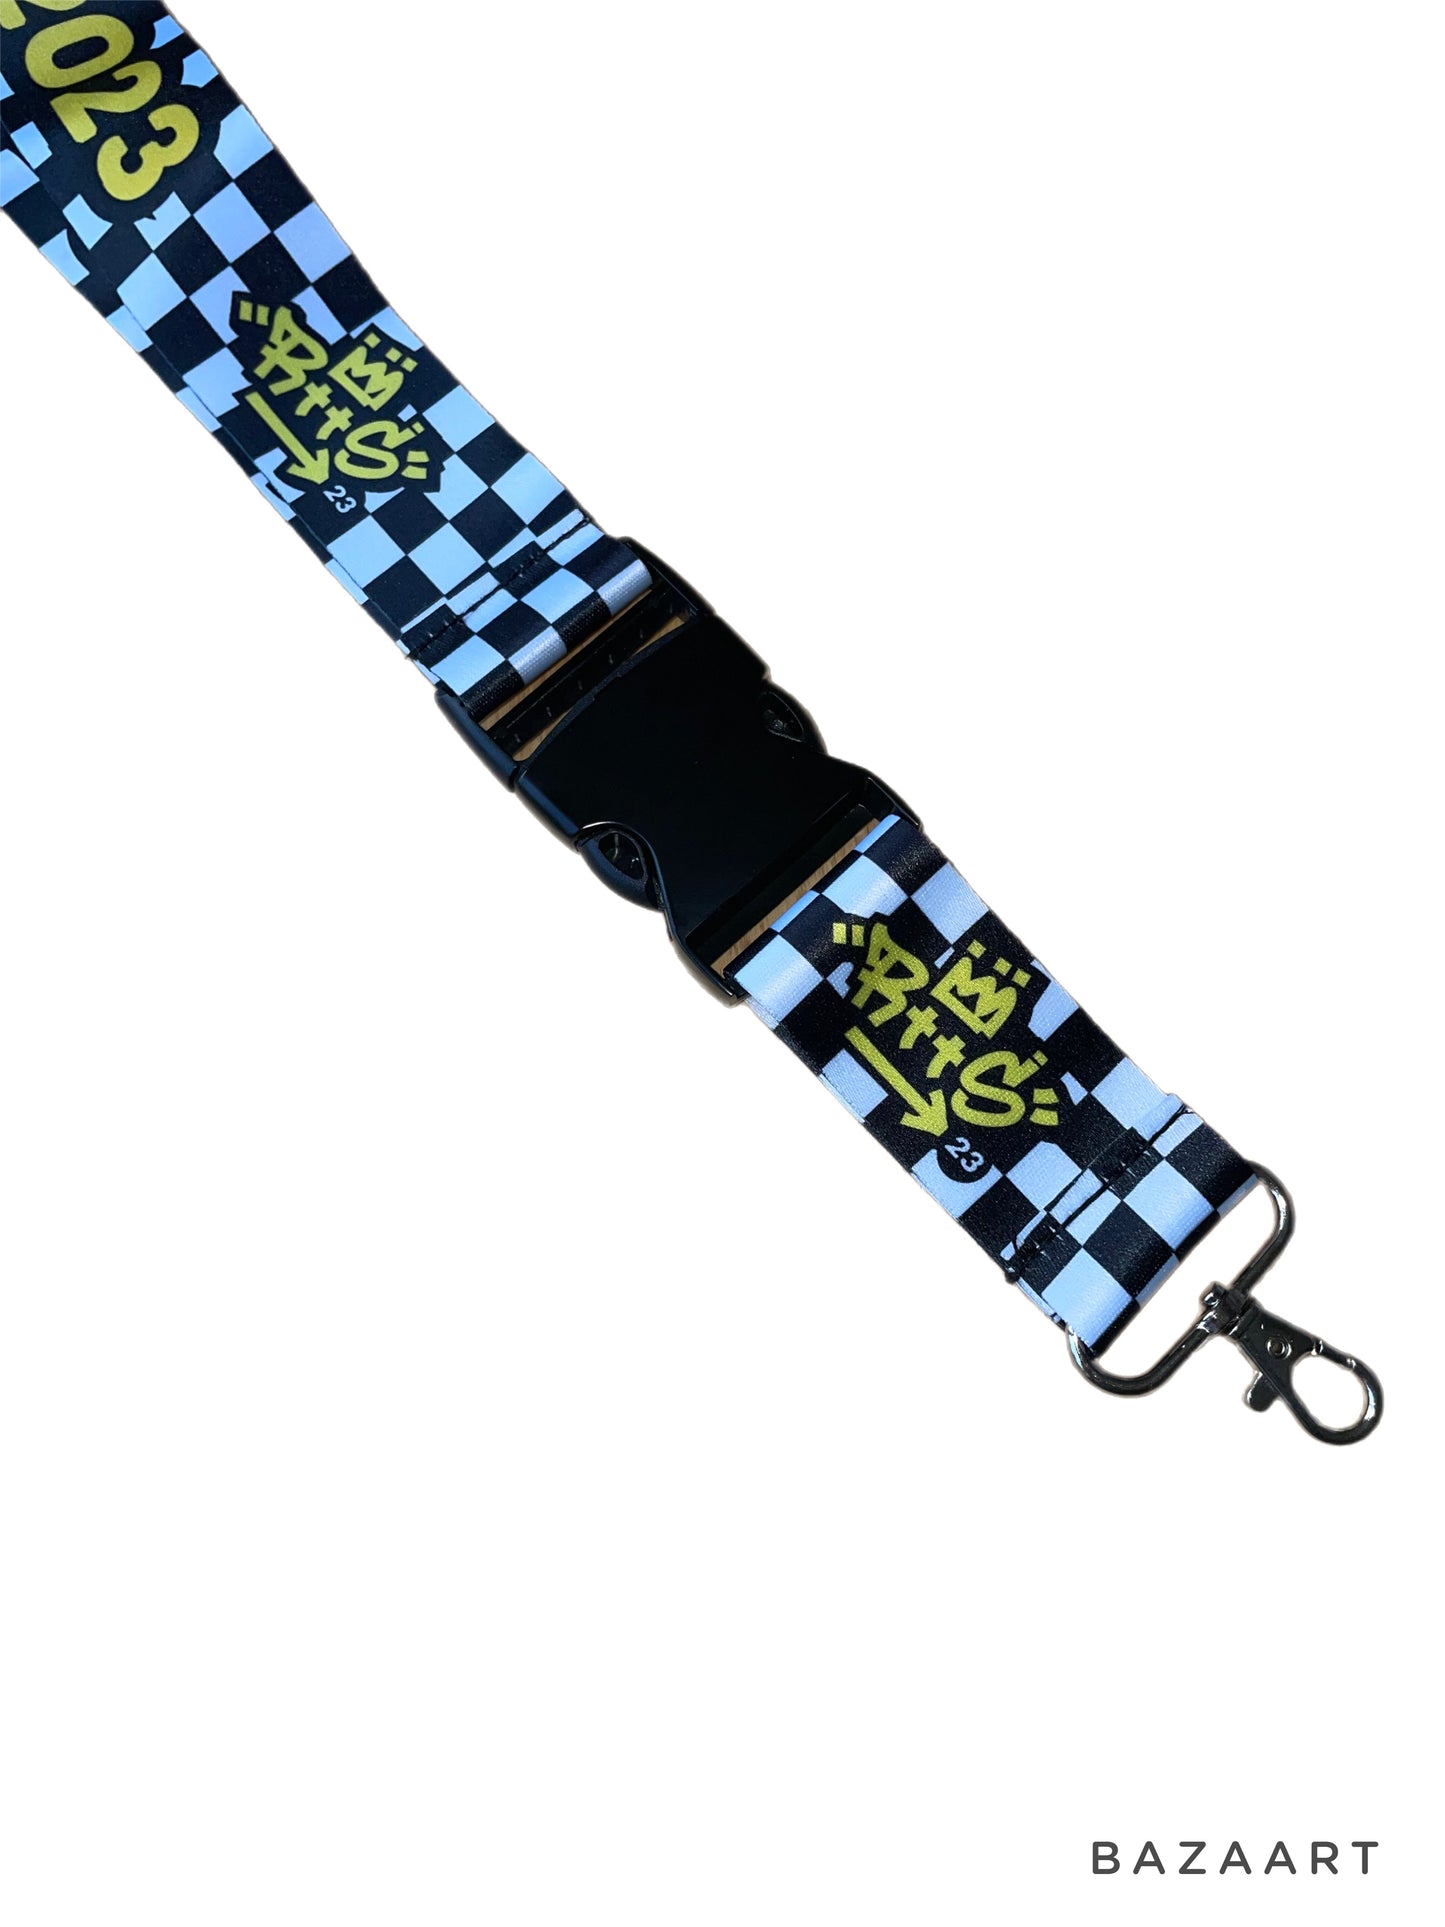 RTTS 23 Premium Lanyard - Extra Chunky with metal clip